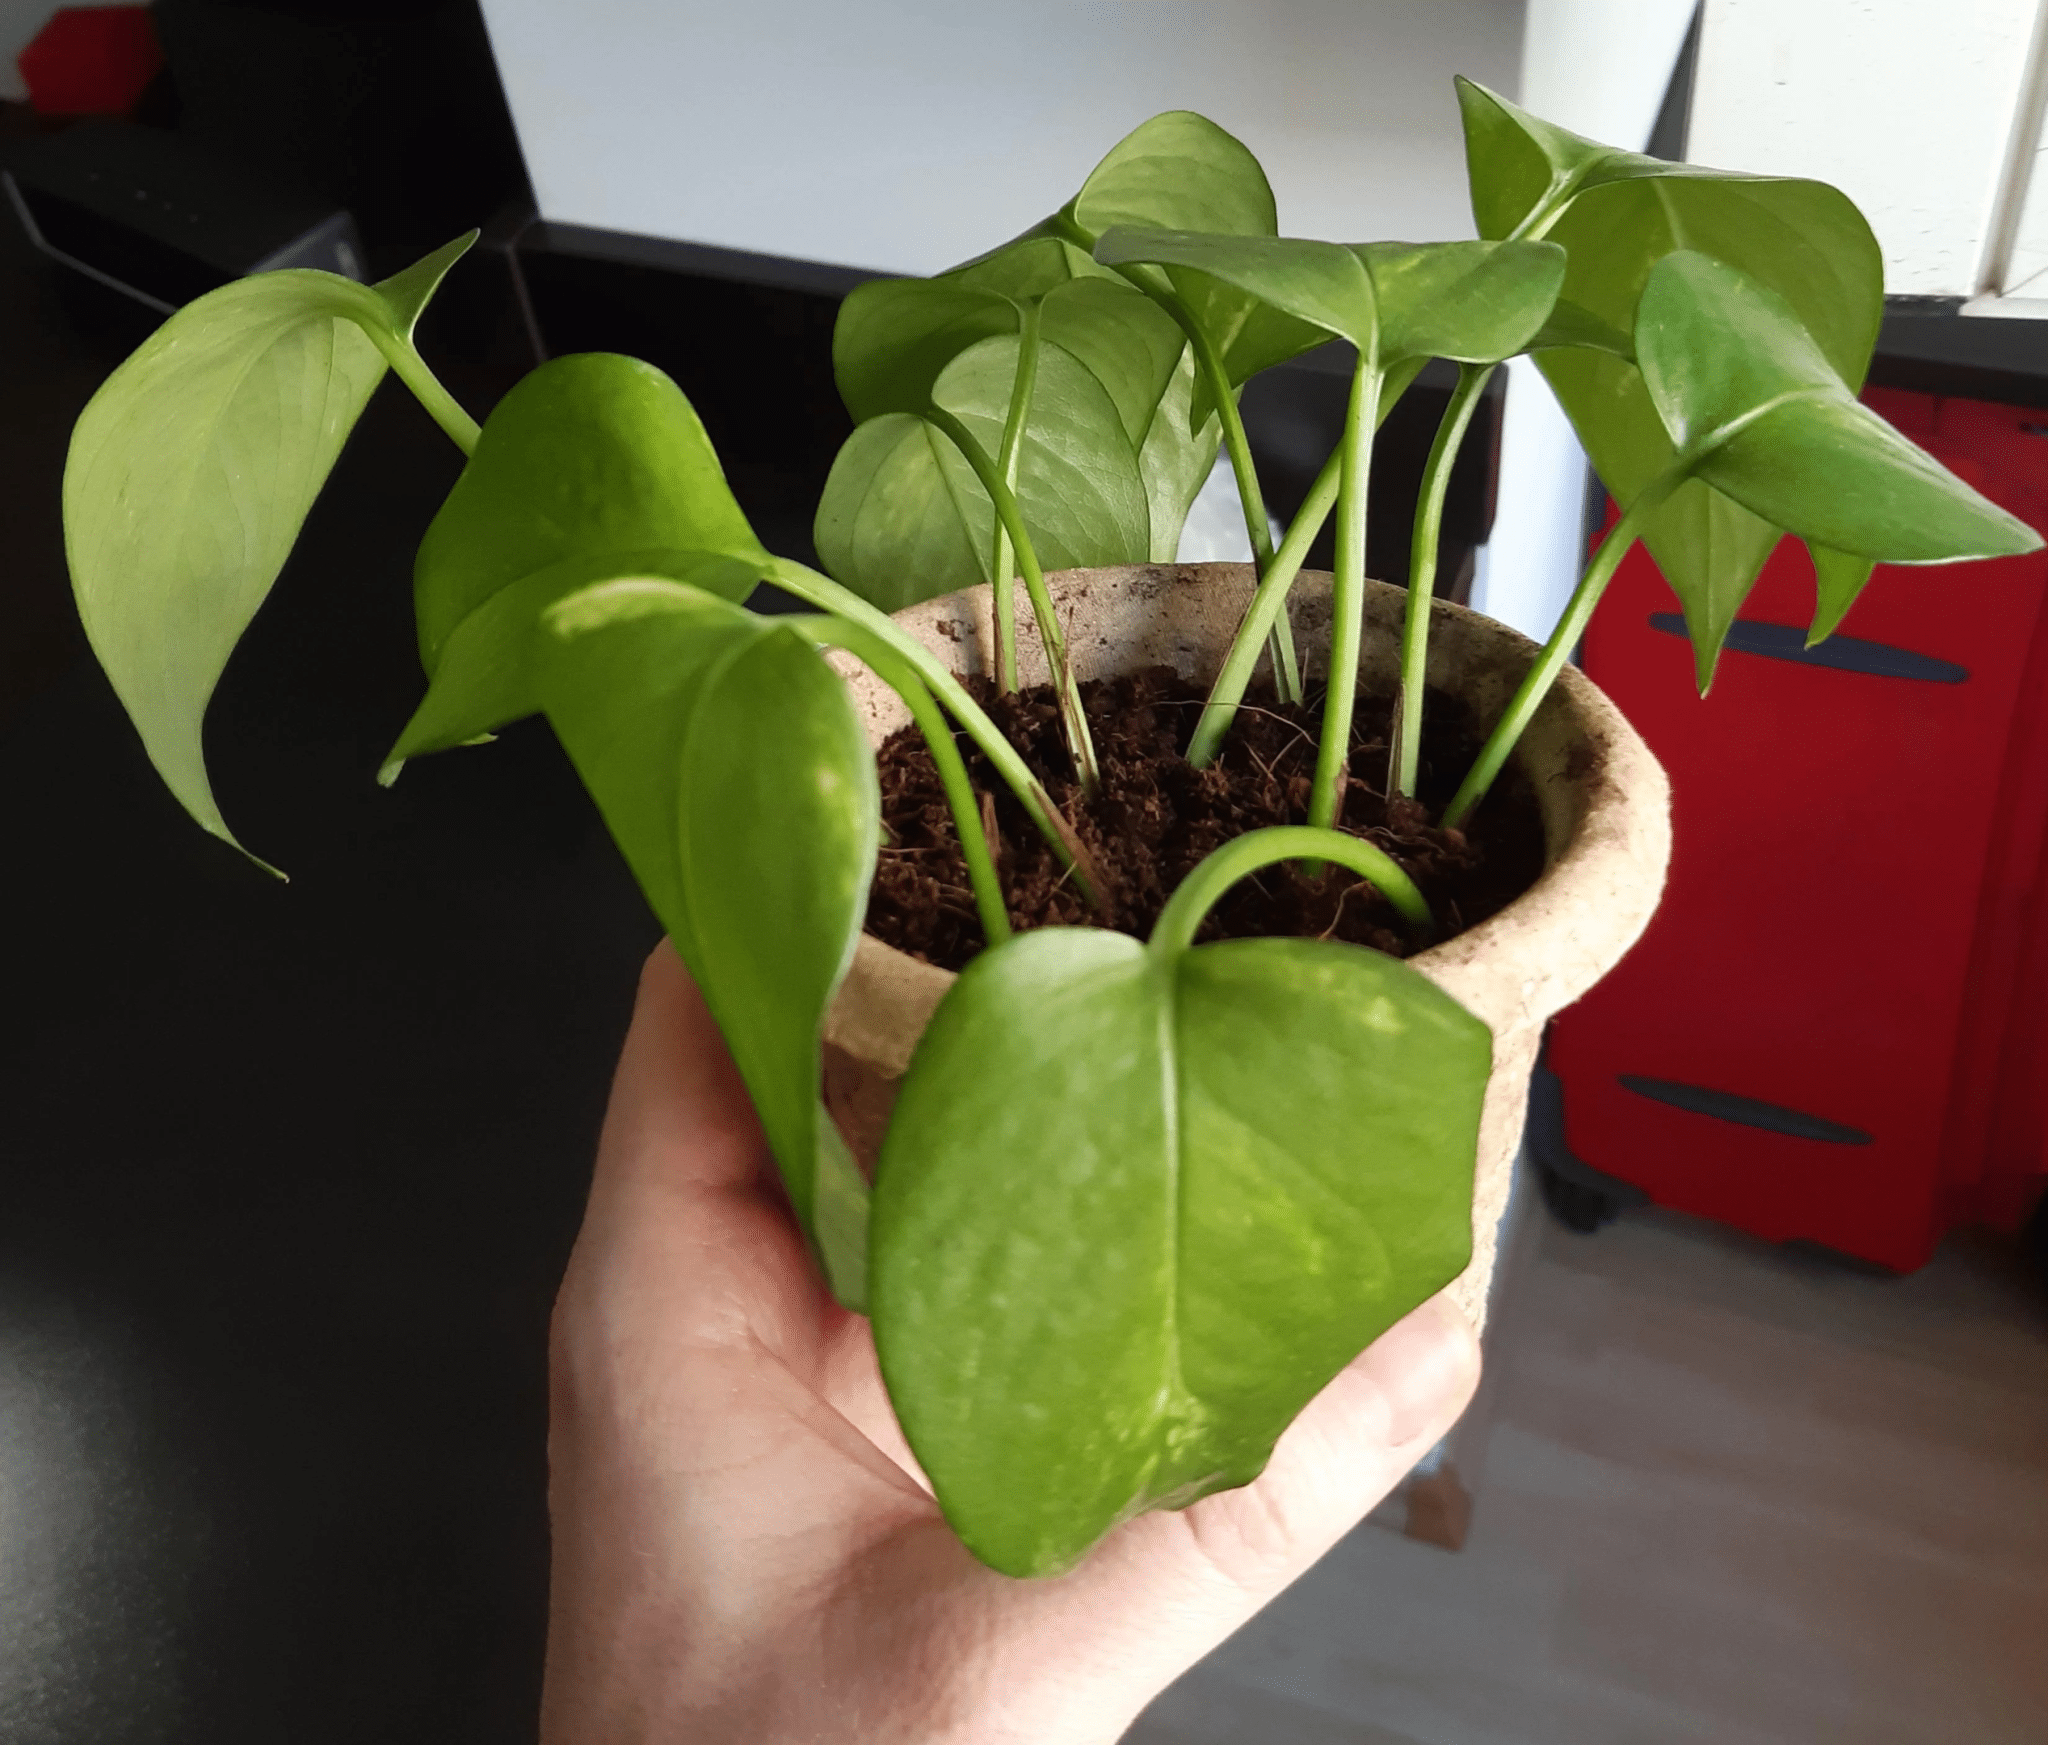 Golden Pothos plant with several cuttings in a pot filled with fresh potting soil